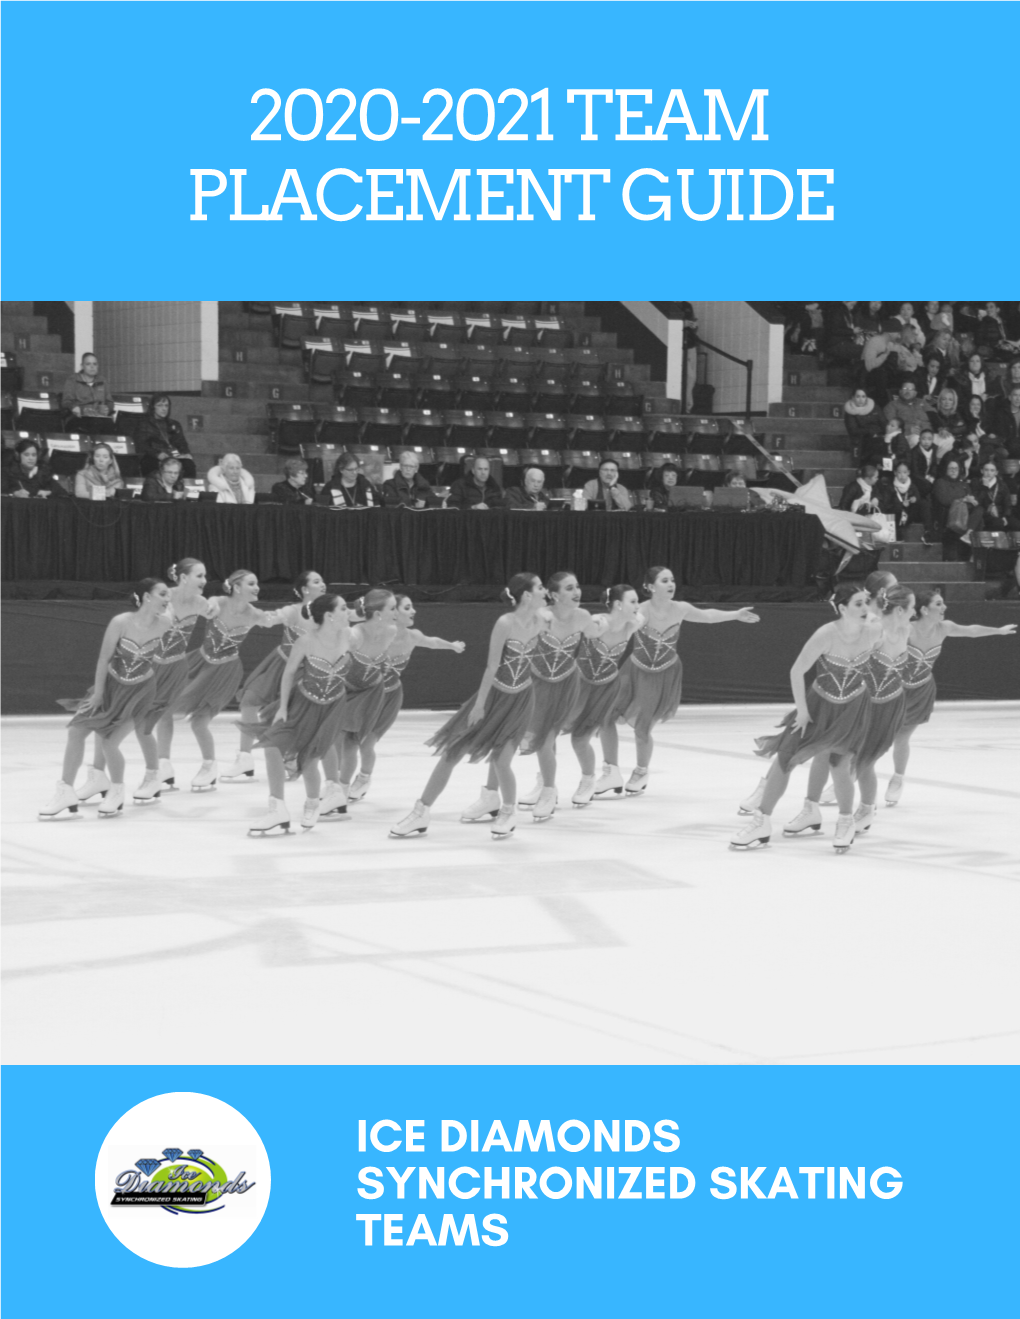 2020-2021 Team Placement Guide